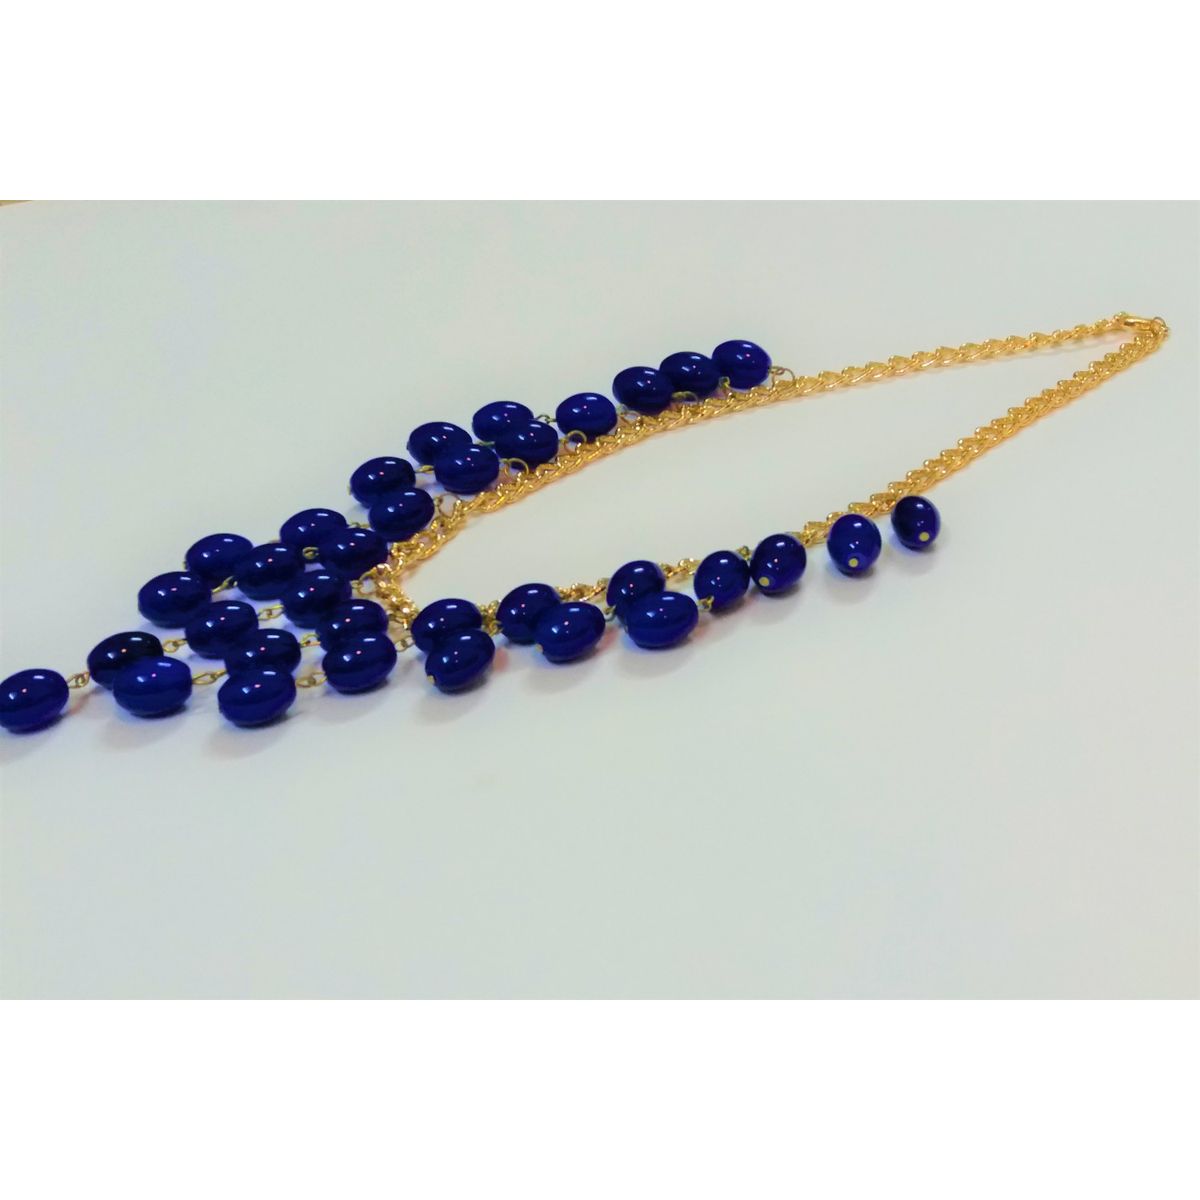 Buy DreamBlue Bauble Necklace at Lowest Price - DRBANE50961POF121406 ...